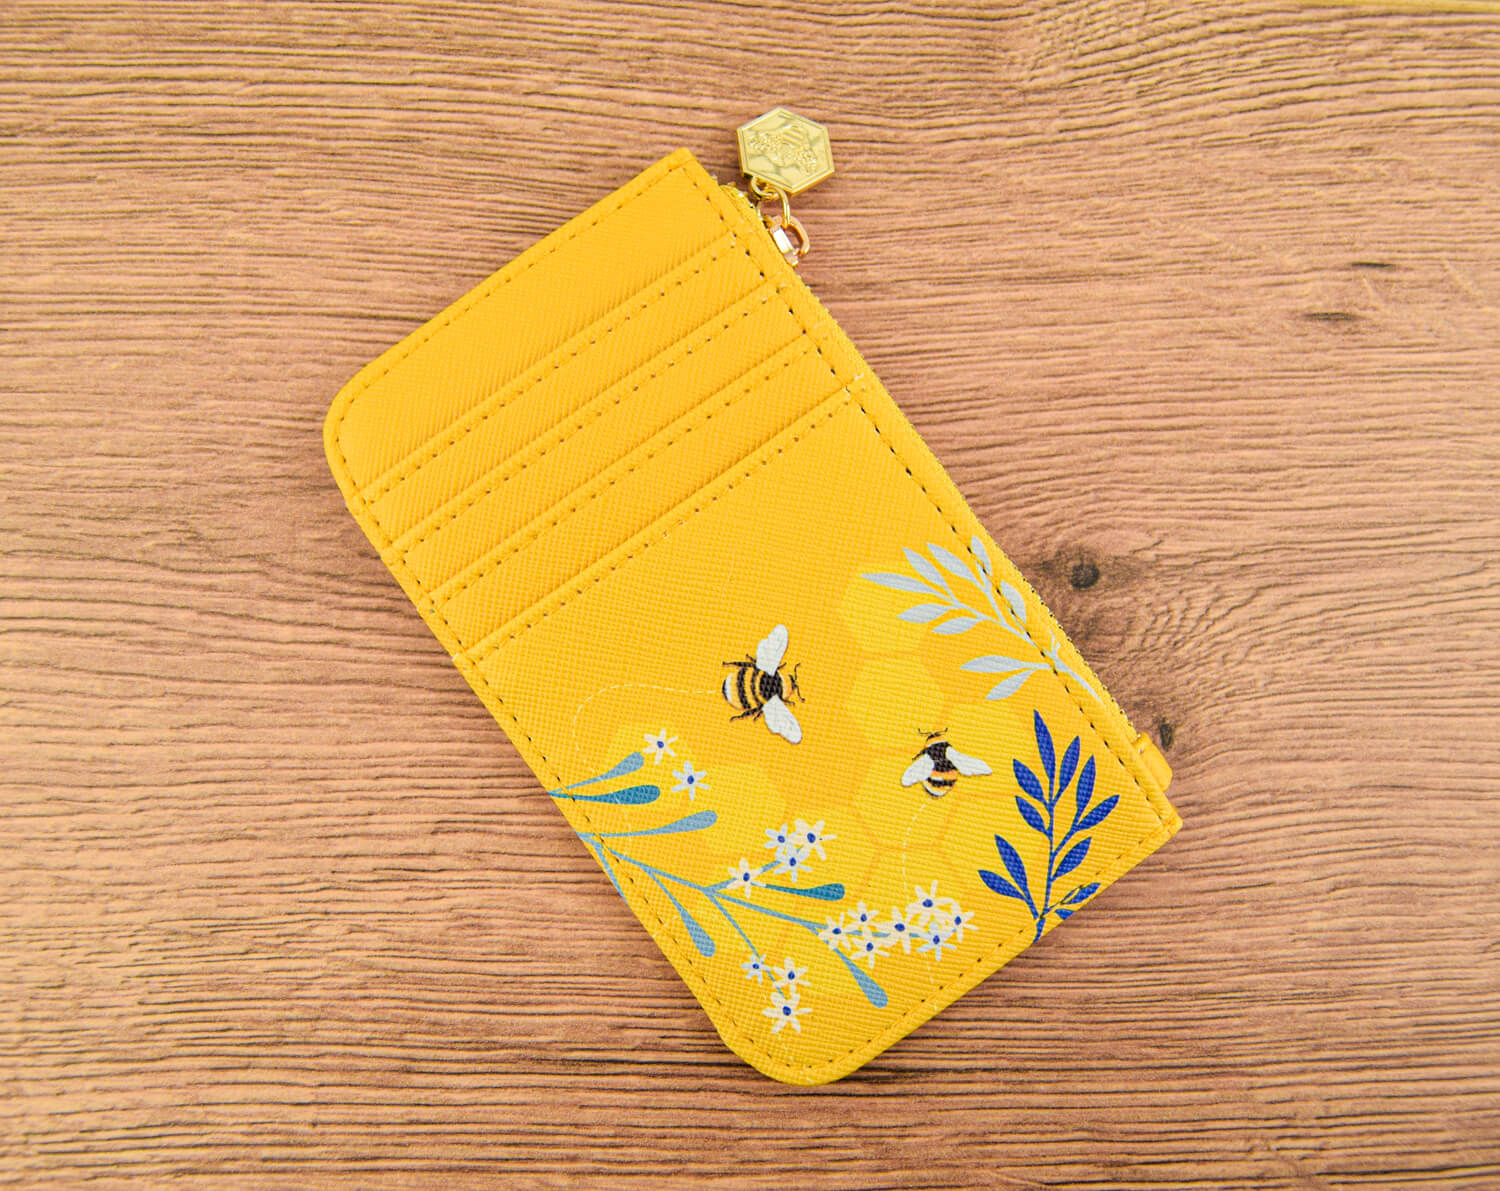 Yellow Bee Card Holder Purse | The Manchester Shop